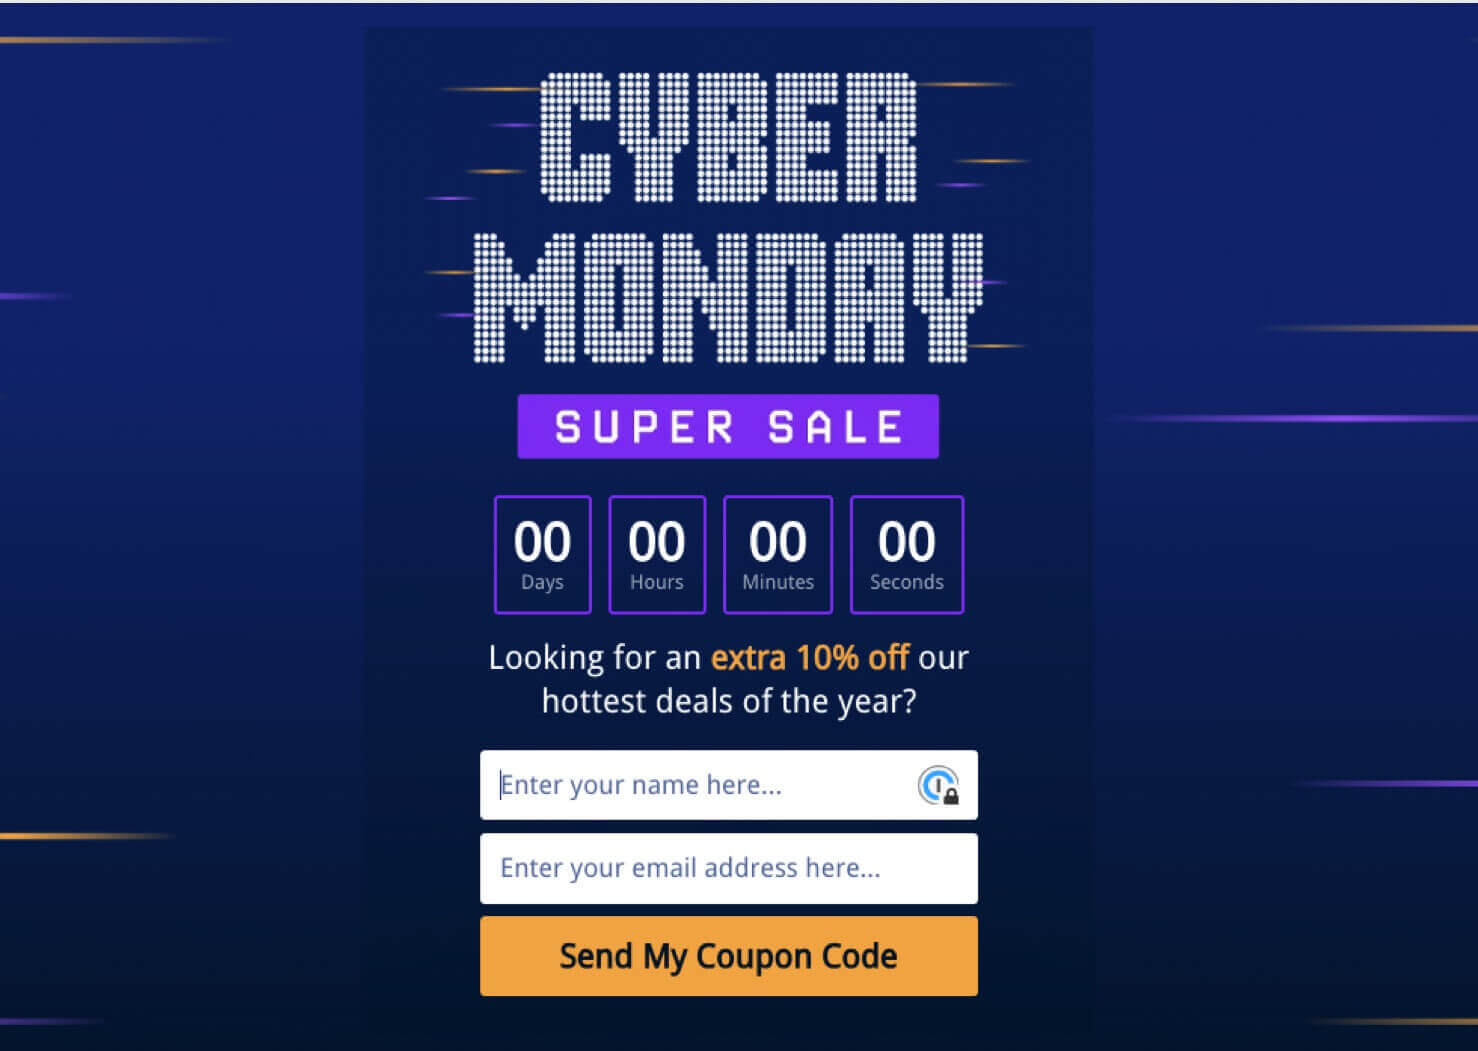 OptinMonster popup template that says "Cyber Monday Super Sale" followed by a countdown timer. "Looking for an extra 10% off our hottest deals of the year?" Call-to-action button says "Yes, I Want to Save!"